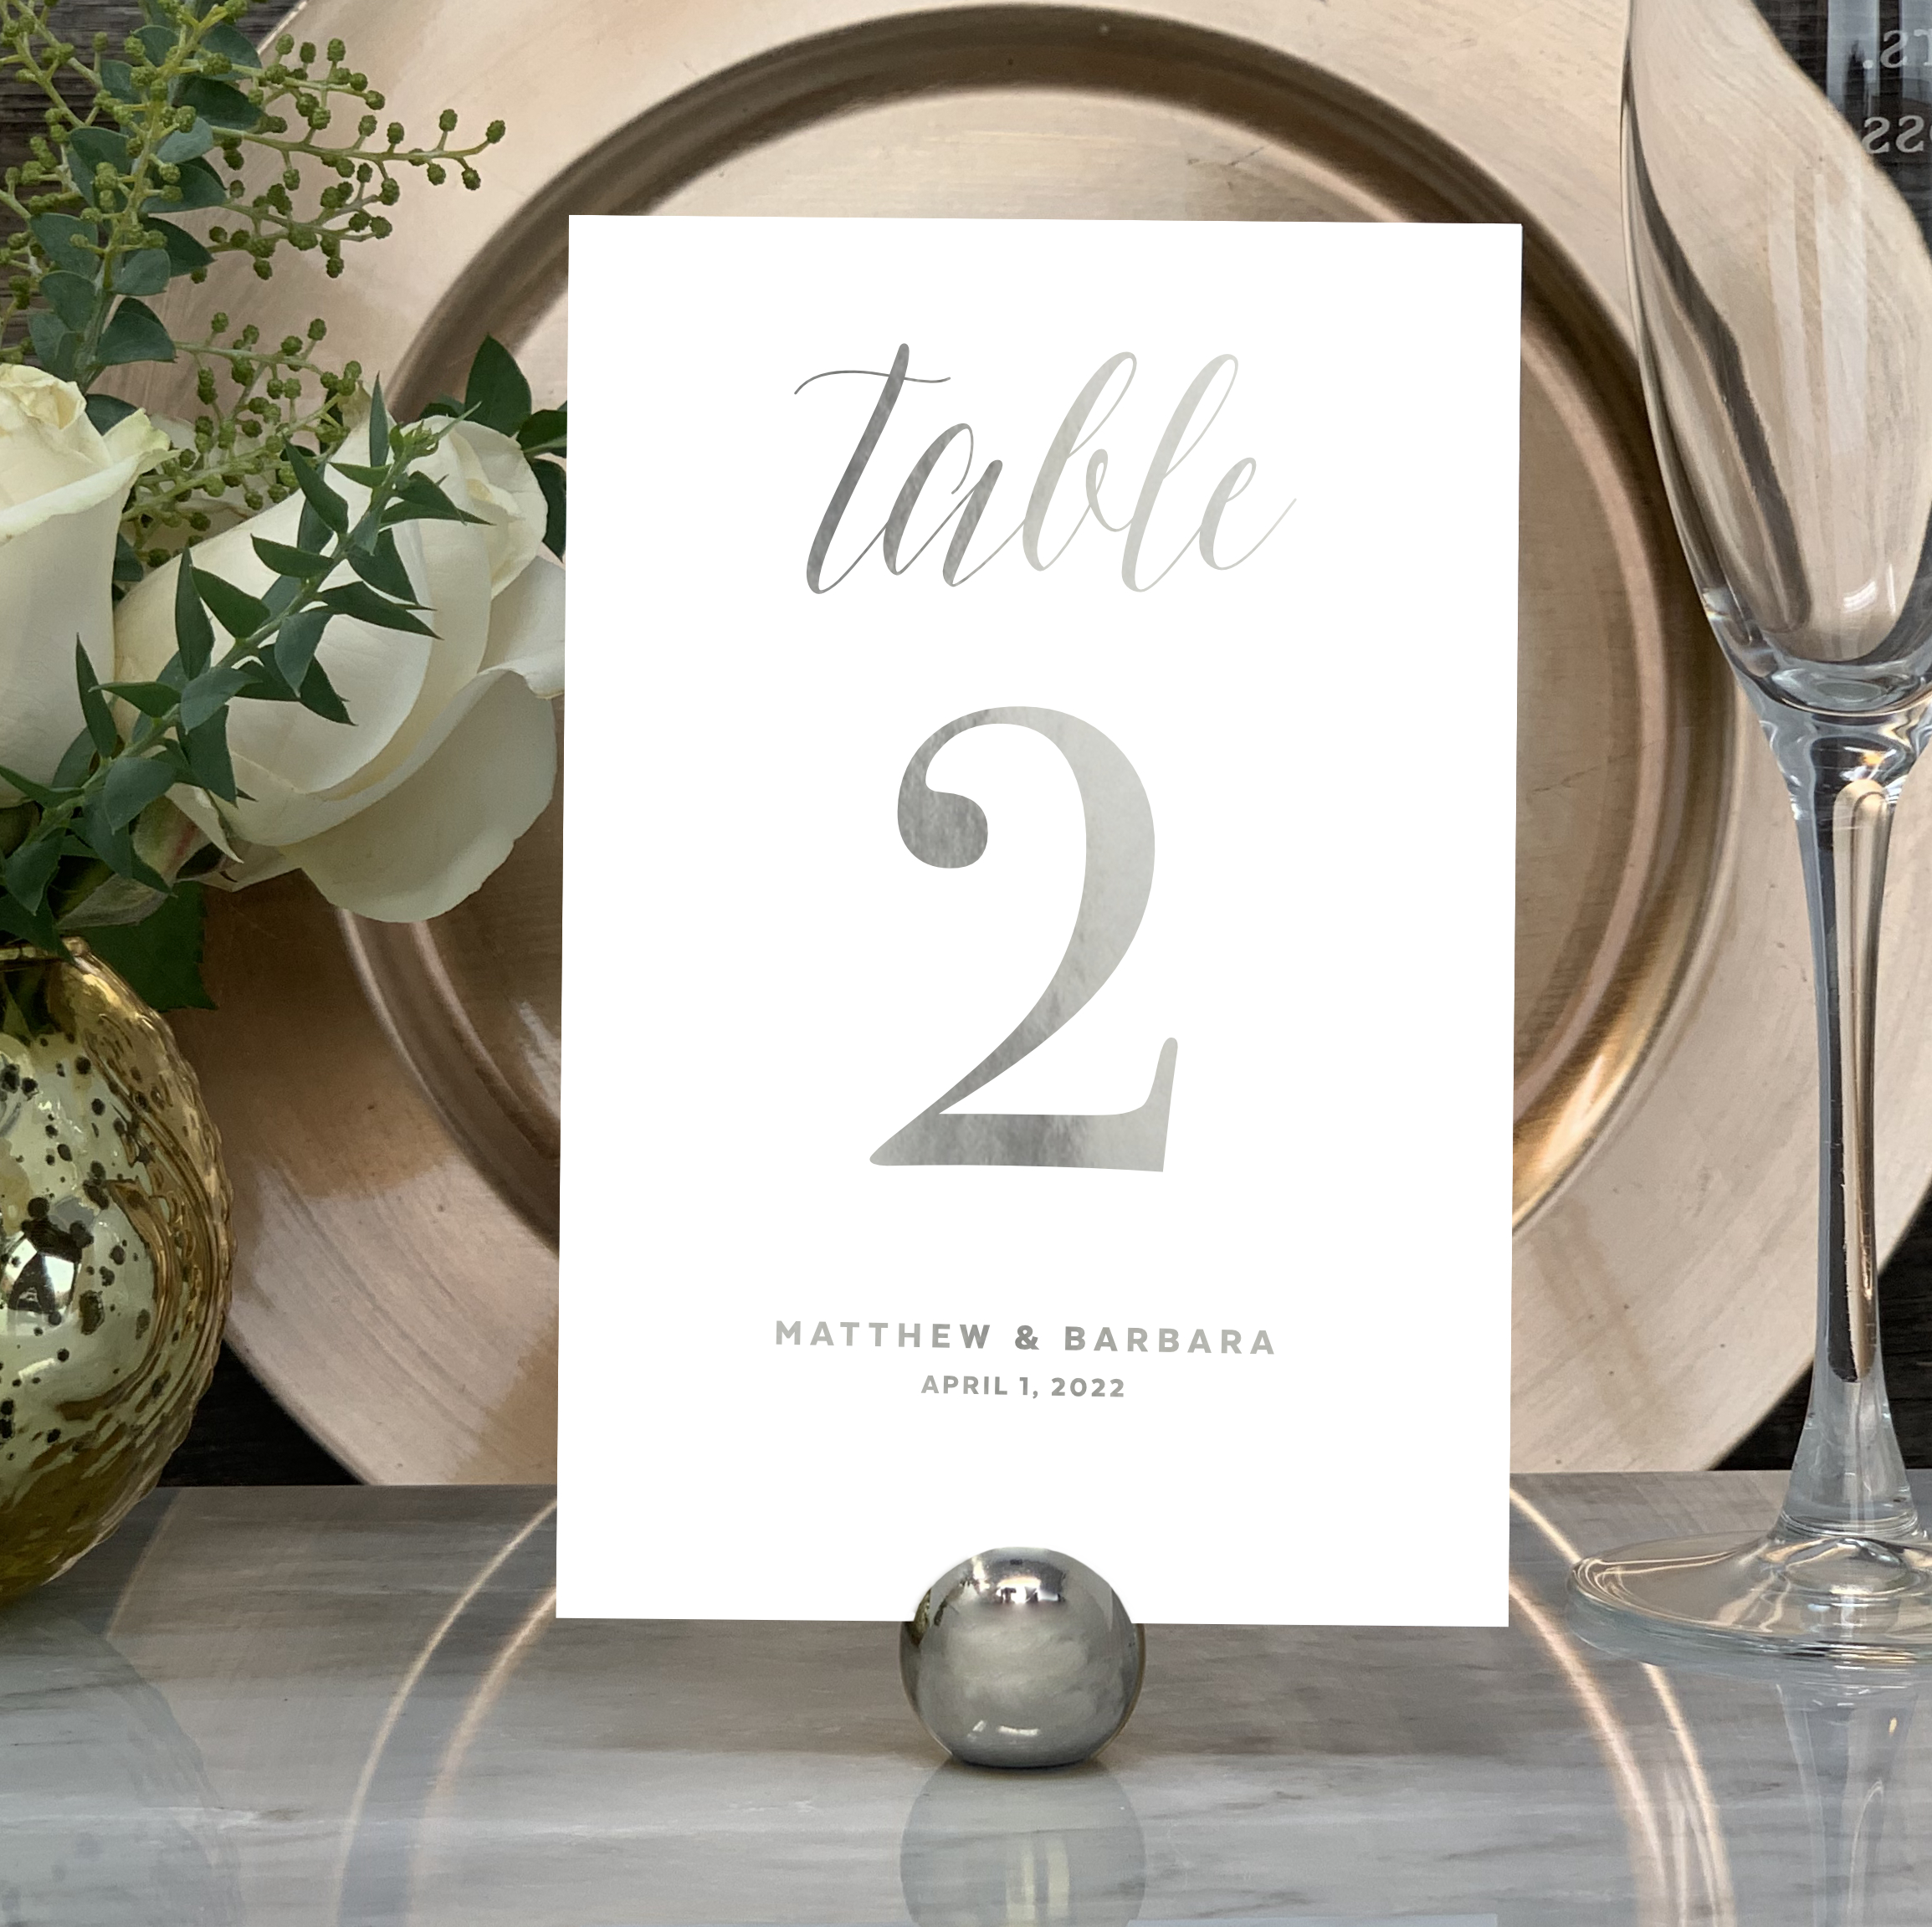 Our Traditional Wedding Table Numbers are shown here in silver foil.